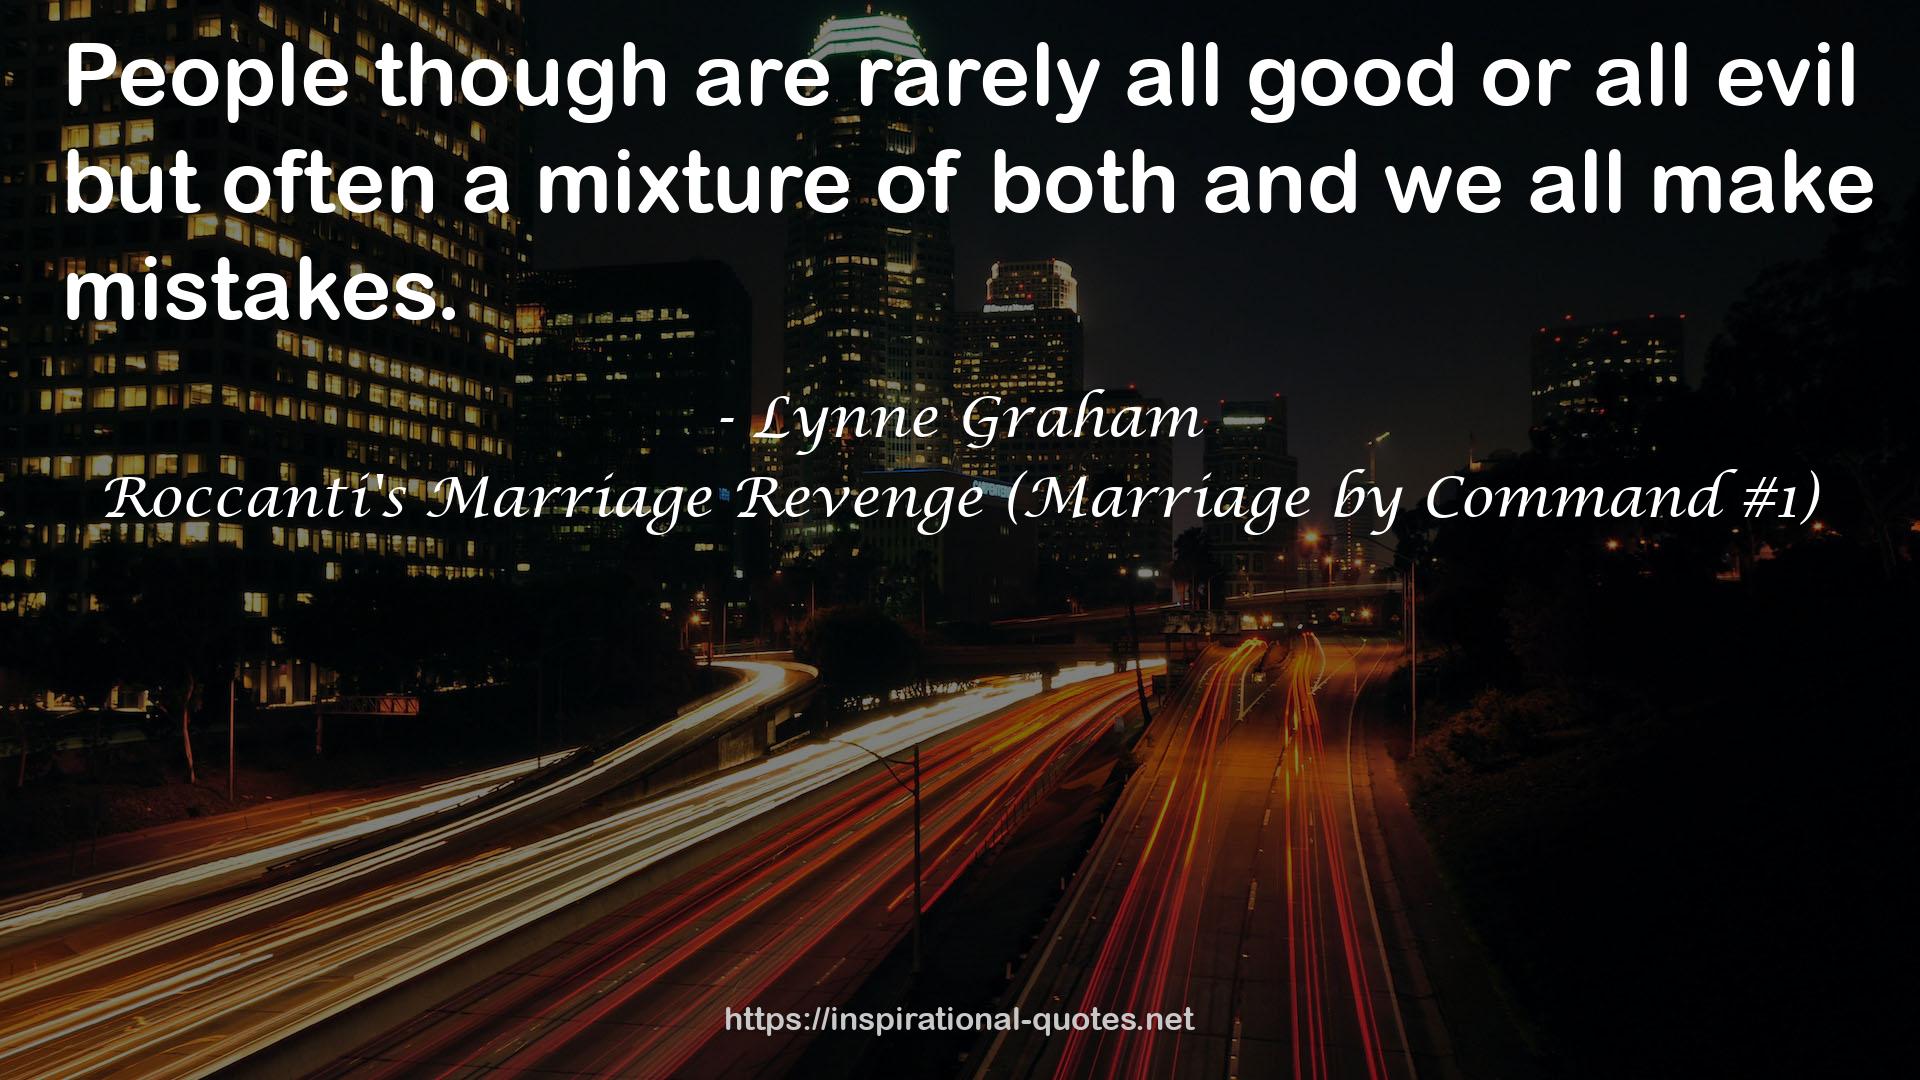 Roccanti's Marriage Revenge (Marriage by Command #1) QUOTES